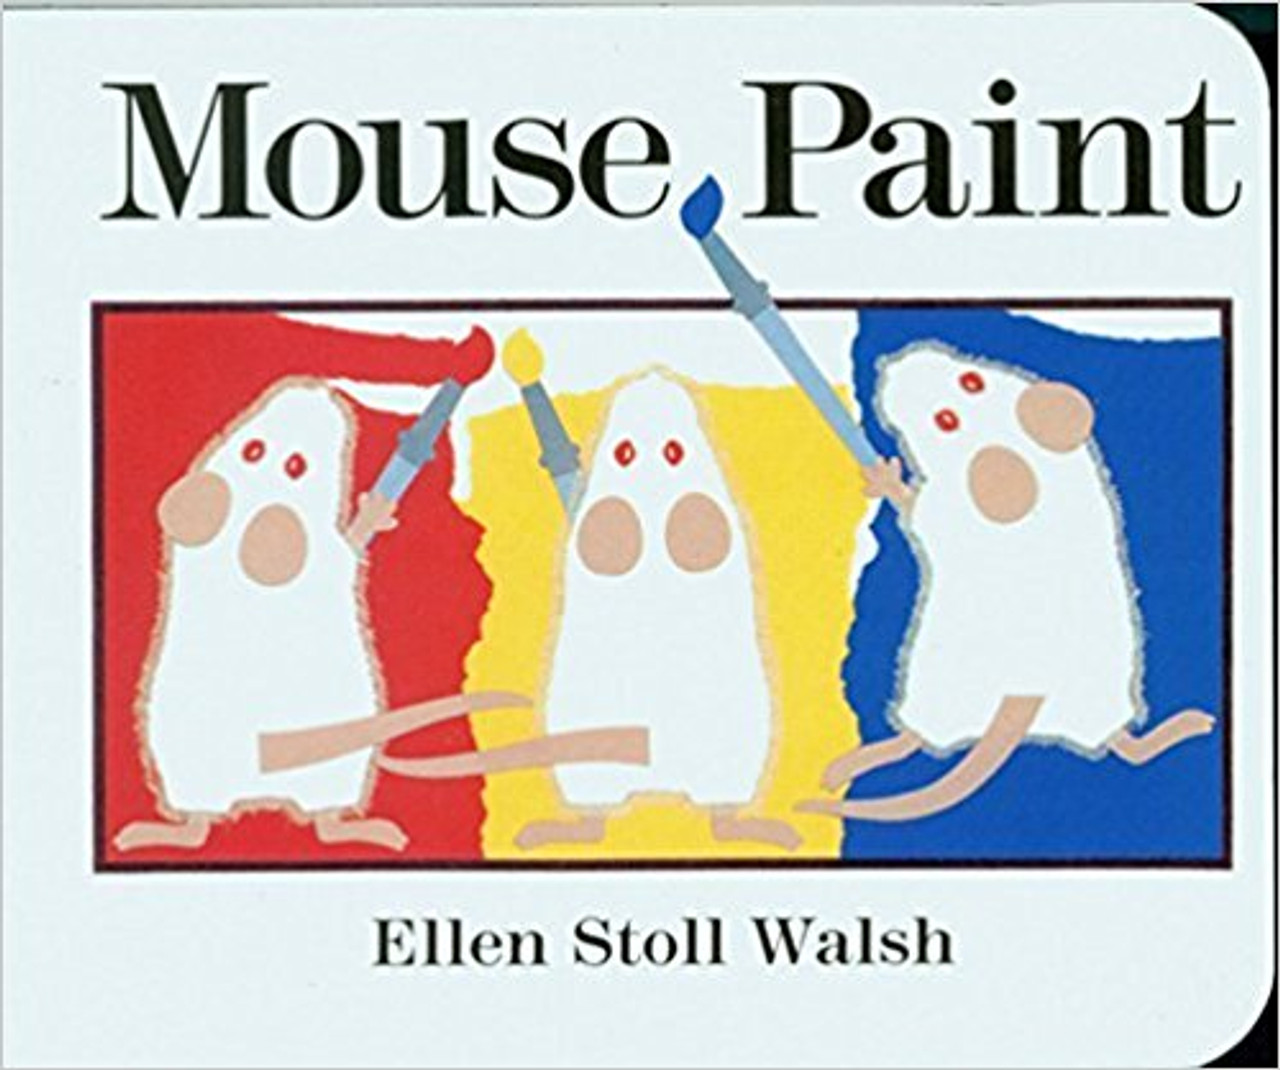 "Mouse Paint" is a lighthearted introduction to color concepts for young children. Three white mice find three jars of paint - red, blue, and yellow. They jump in and out, dance in the puddles, and discover some amazing things - things like green...and orange...and purple Yet they never forget about the cat. Ellen Stoll Walsh's mice are enchanting. Their antics will delight children learning colors - and their parents as well.